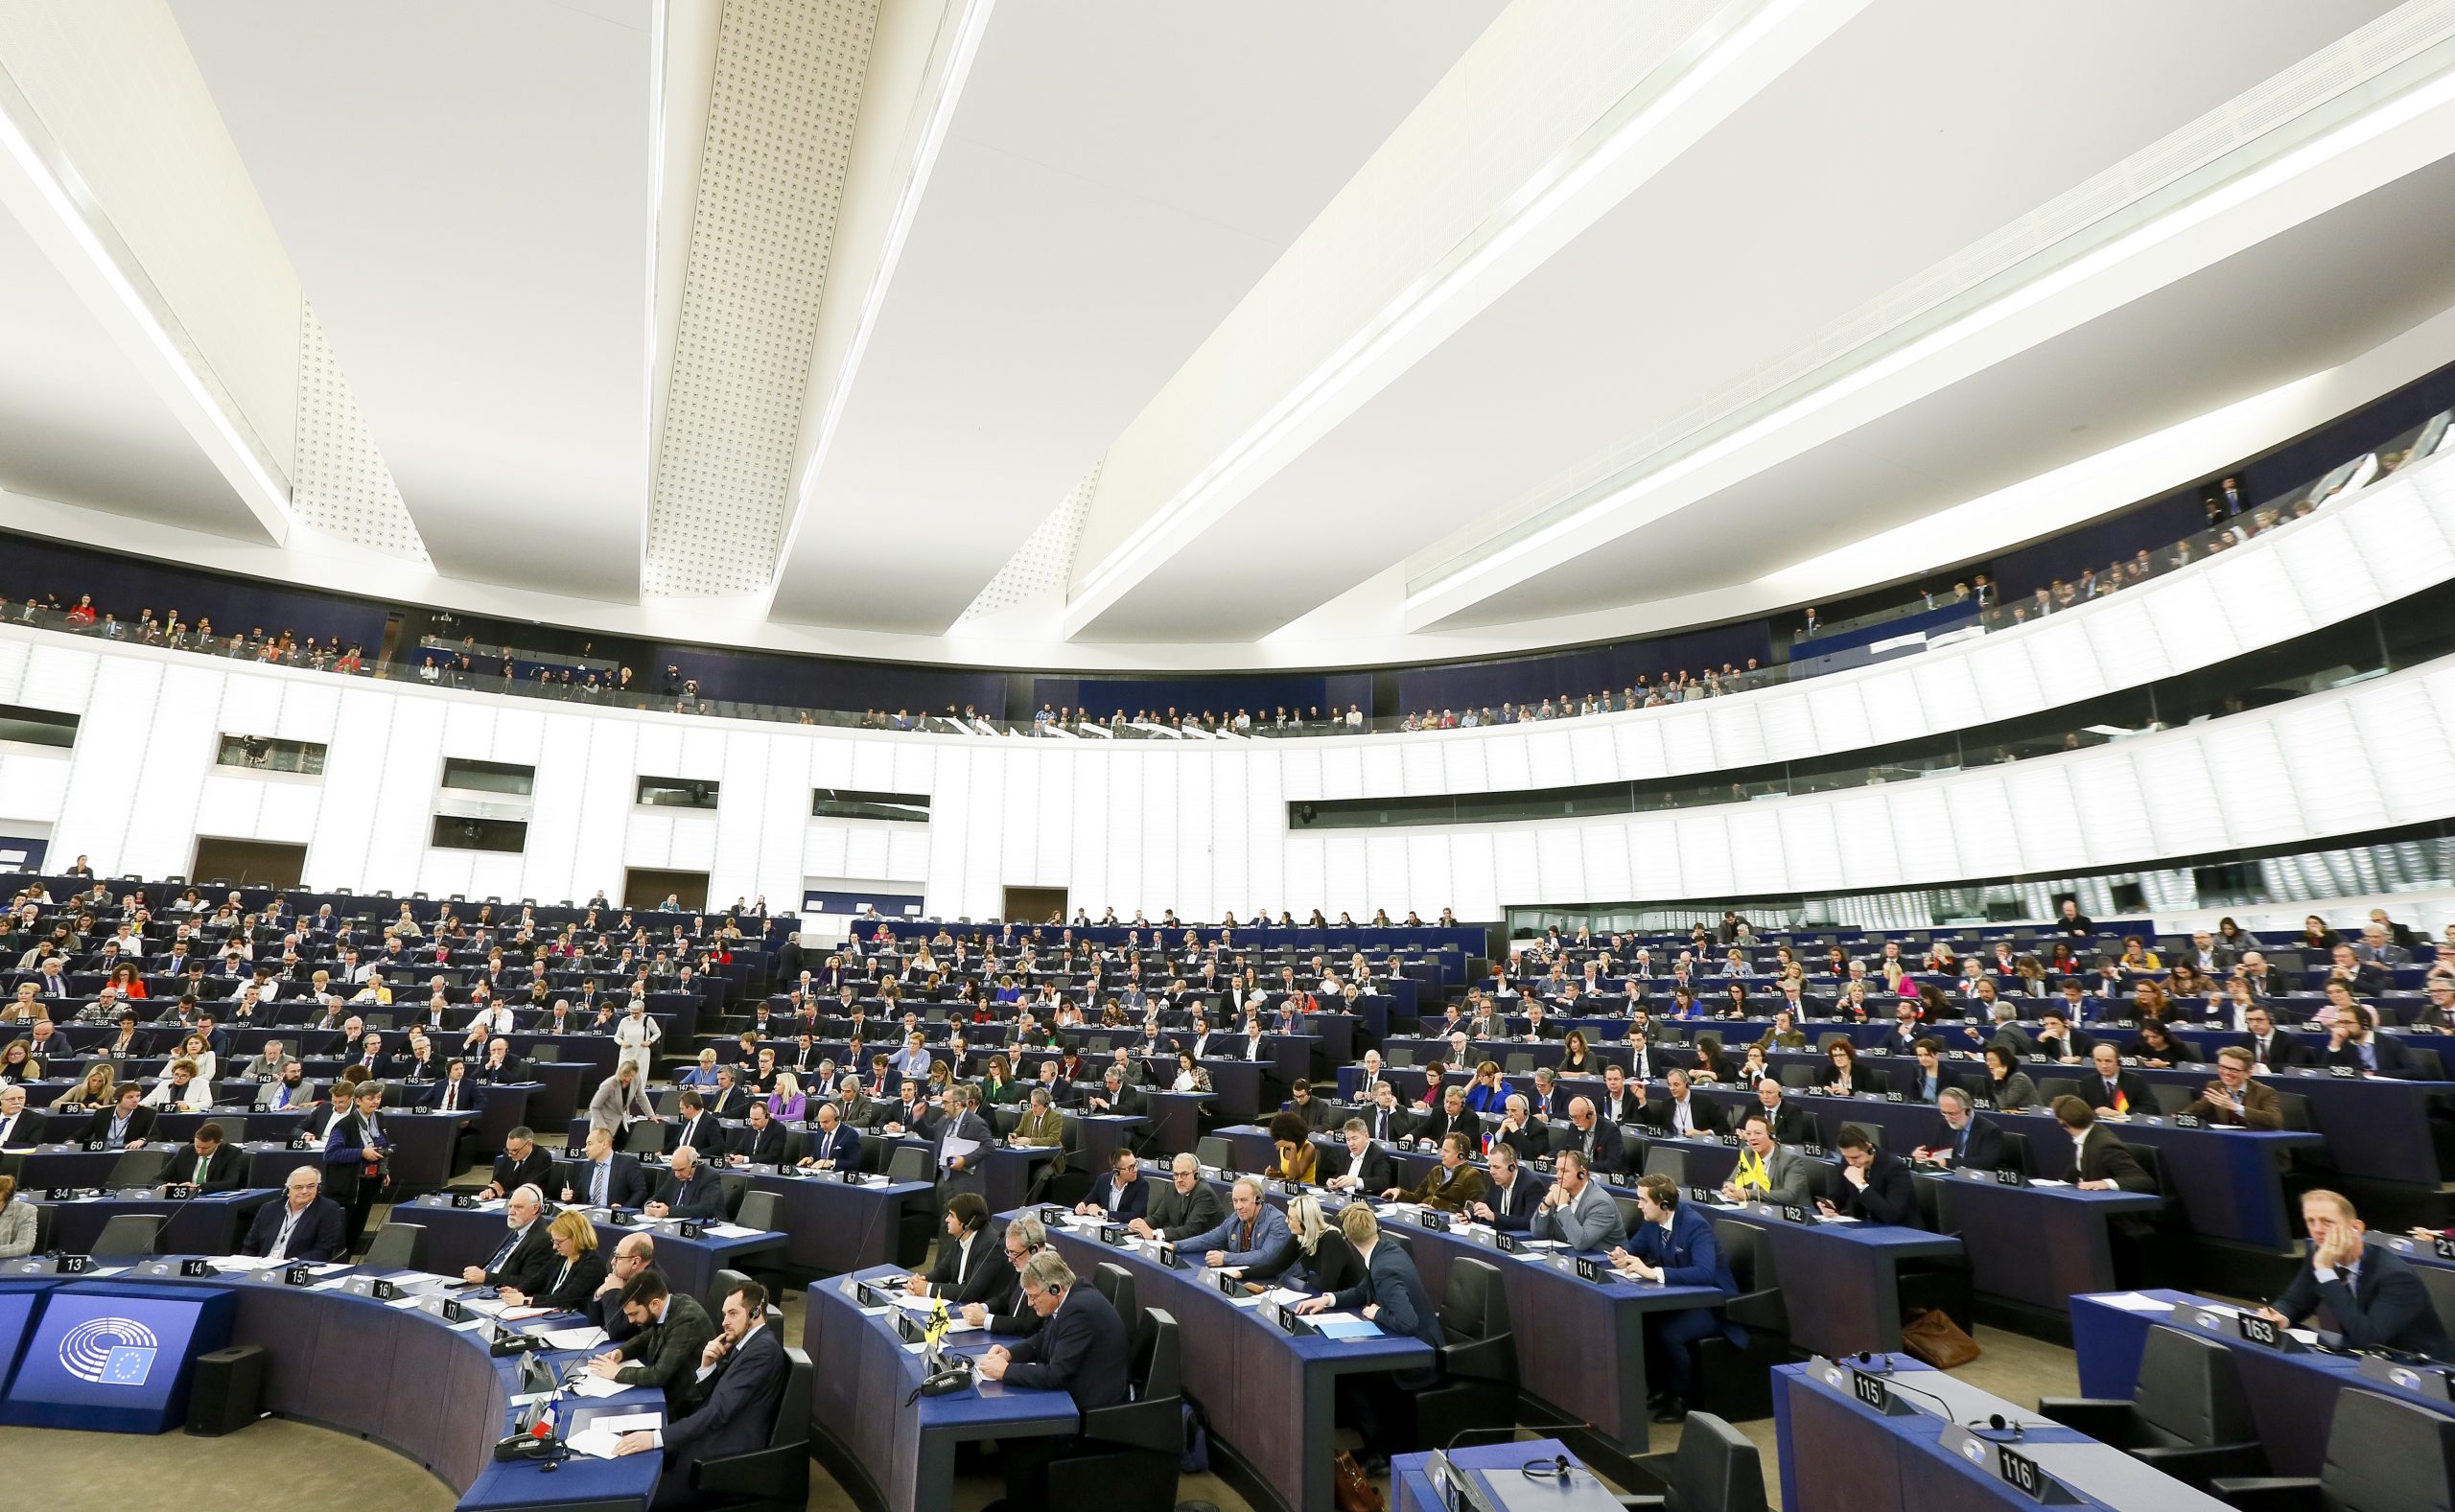 © European Union 2020 - Source : EP, Mathieu CUGNOT, General view on the plenary chamber in Strasbourg after the departure of the UK MEPs